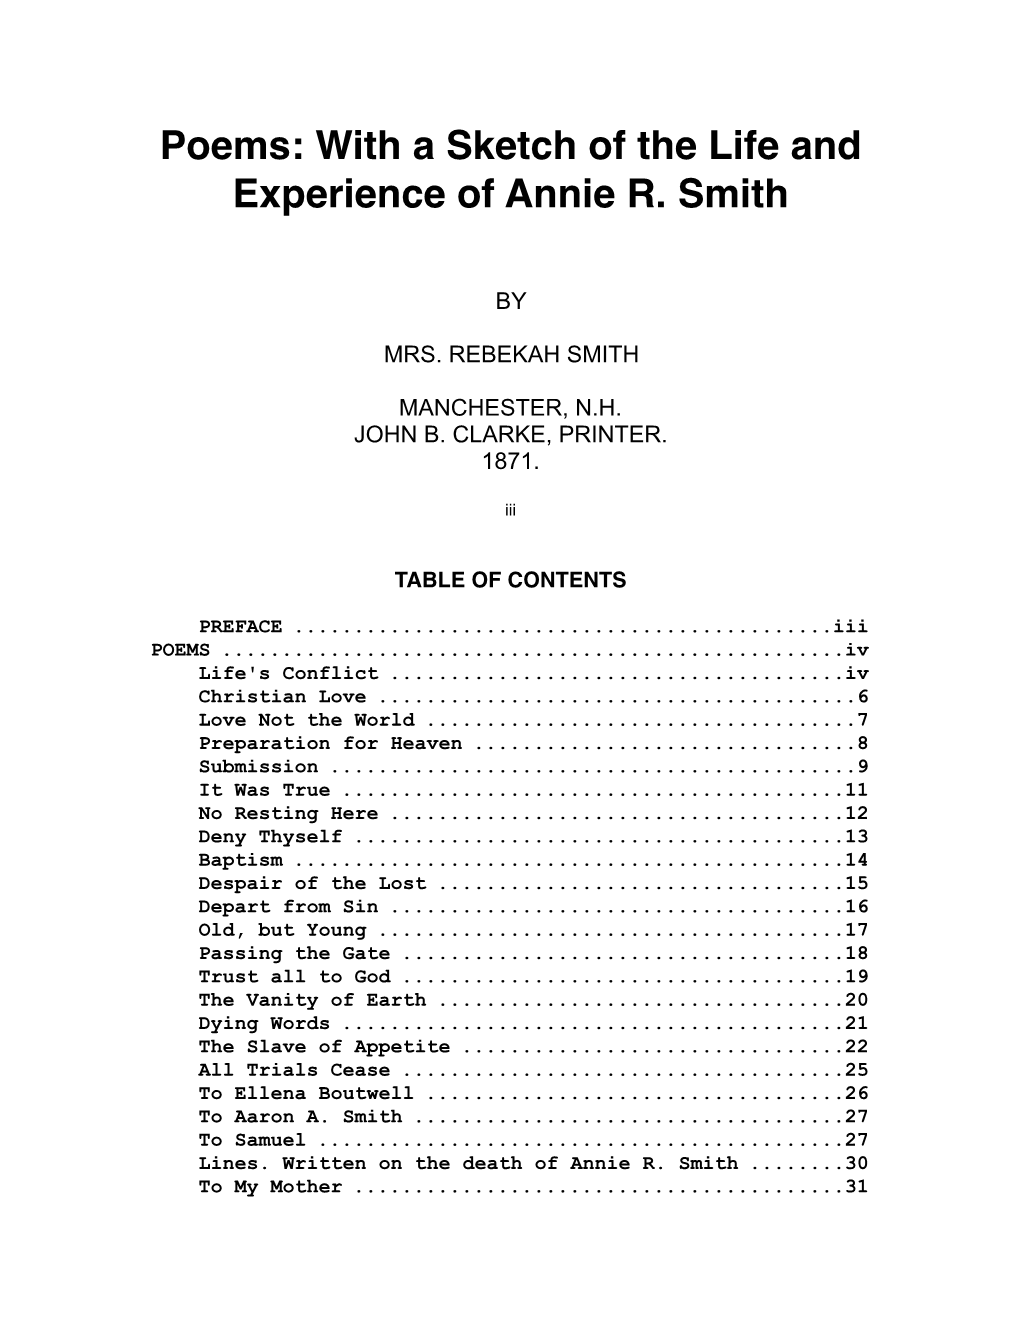 Poems: with a Sketch of the Life and Experience of Annie R. Smith